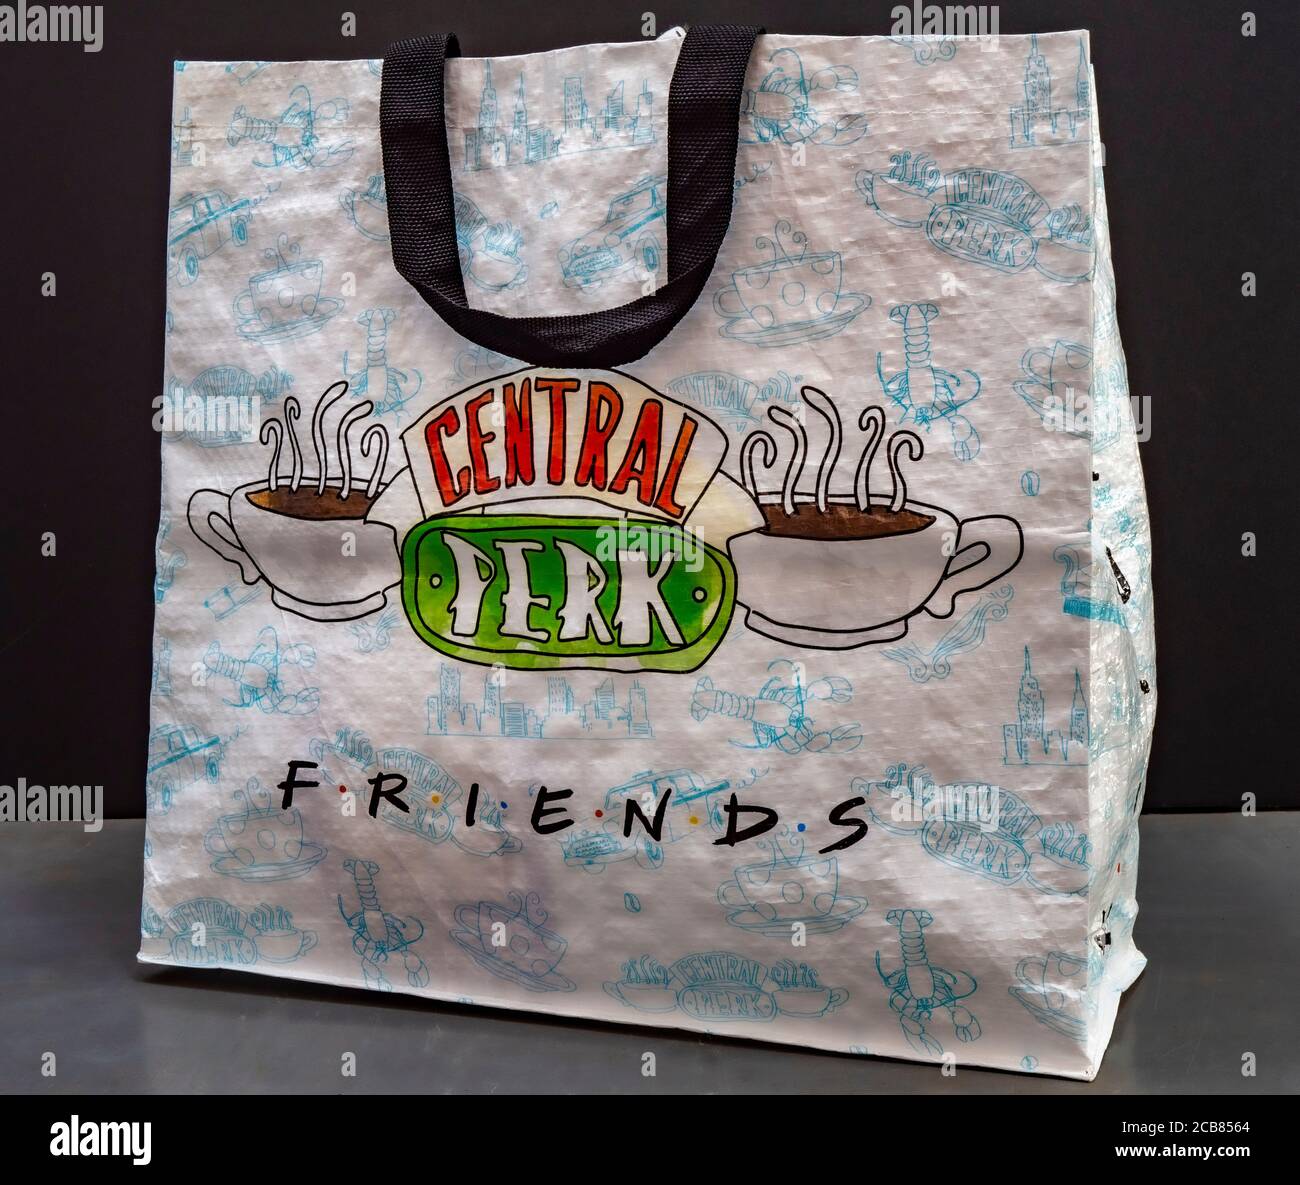 Closeup of a branded, themed tote / carrrier / shopping bag - featuring Central Perk, from the internationally famous Friends TV series. Stock Photo